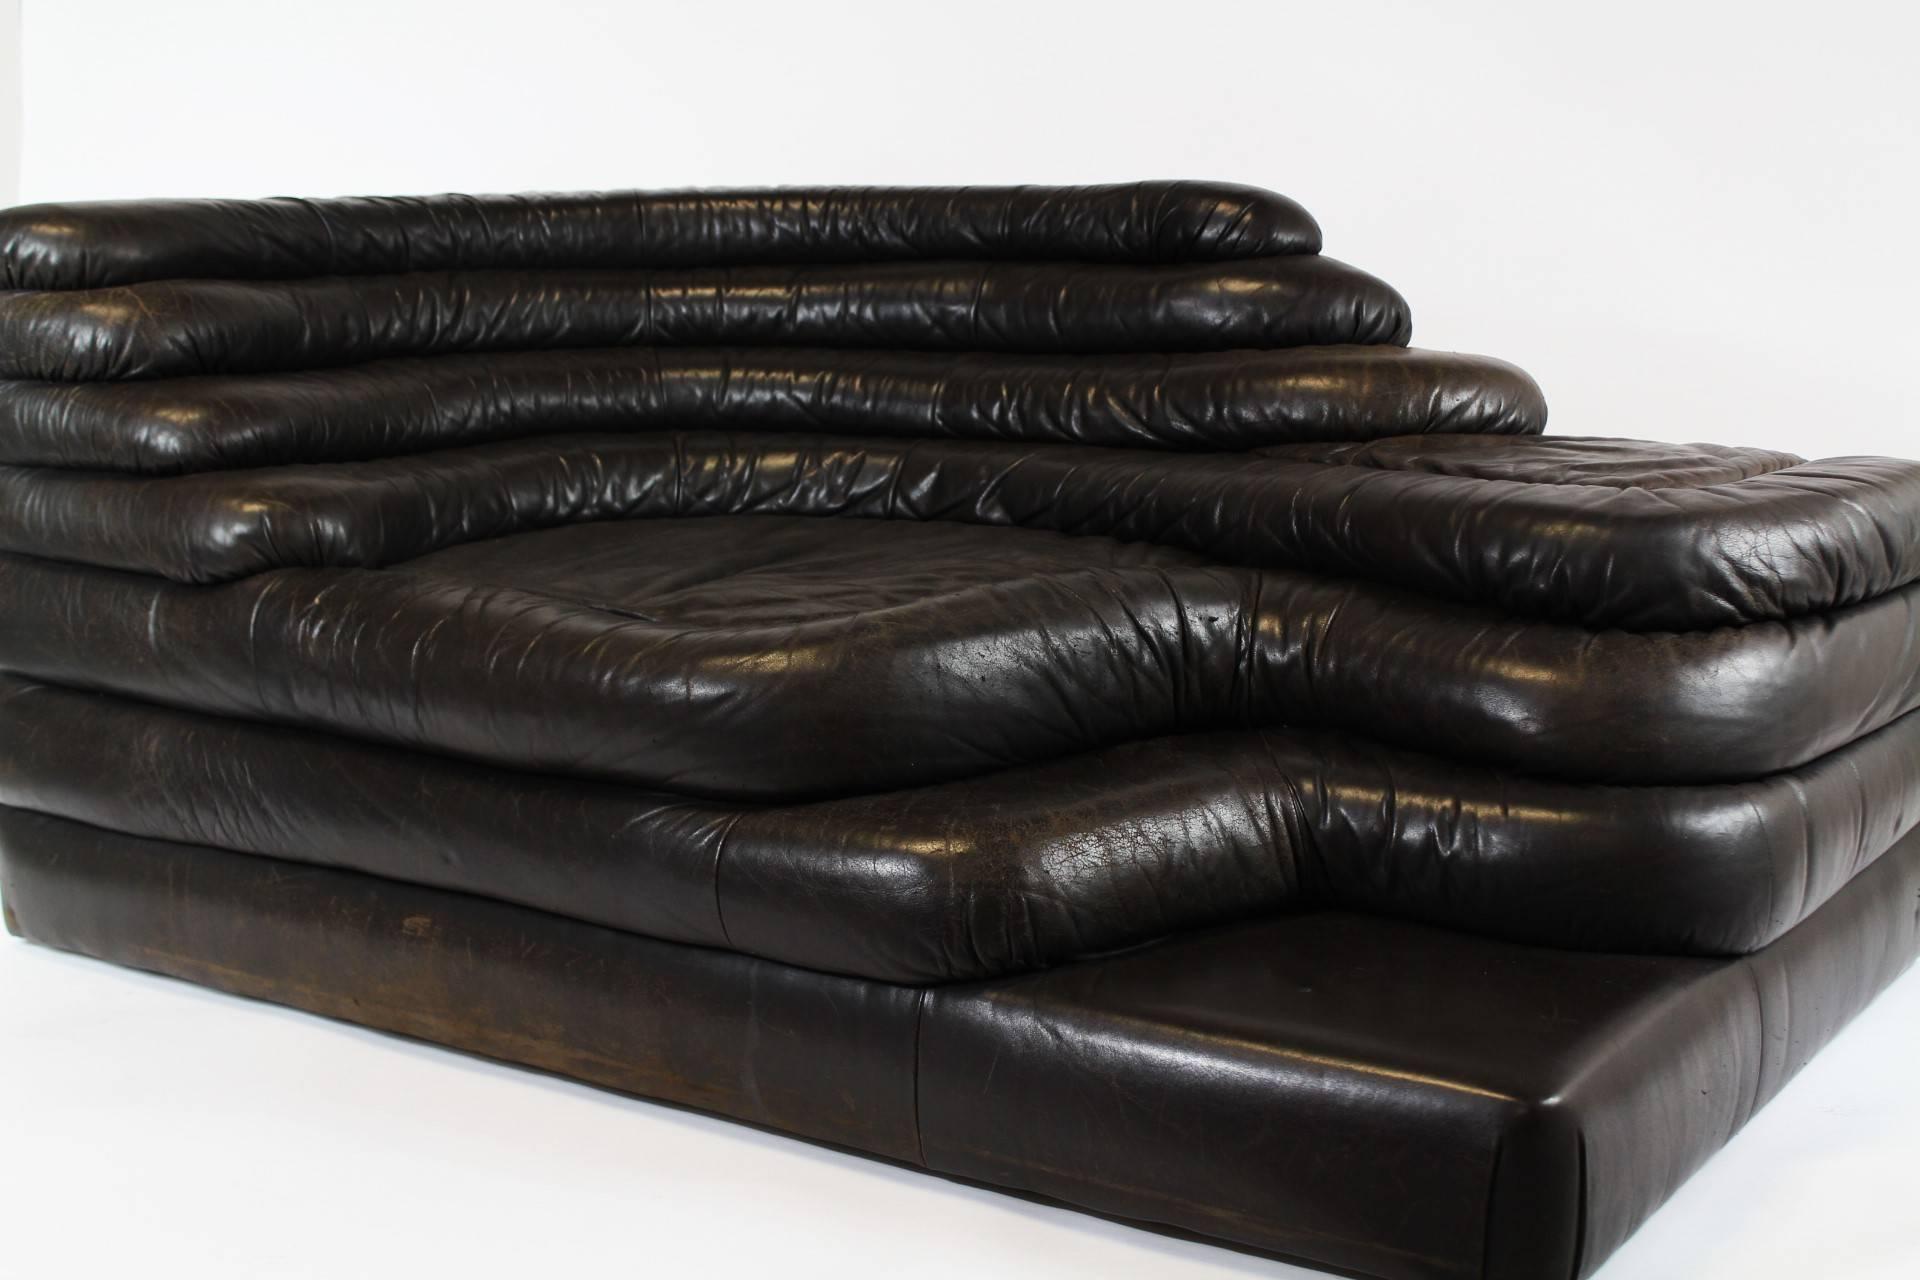 De Sede sofa nr. DS-1025 "Terrazza Landscape" designed by Ubald Klug. The sofa is in original, worn, chocolate dark brown leather. It was made in the 1970s. It is in good original vintage condition with some signs of use.